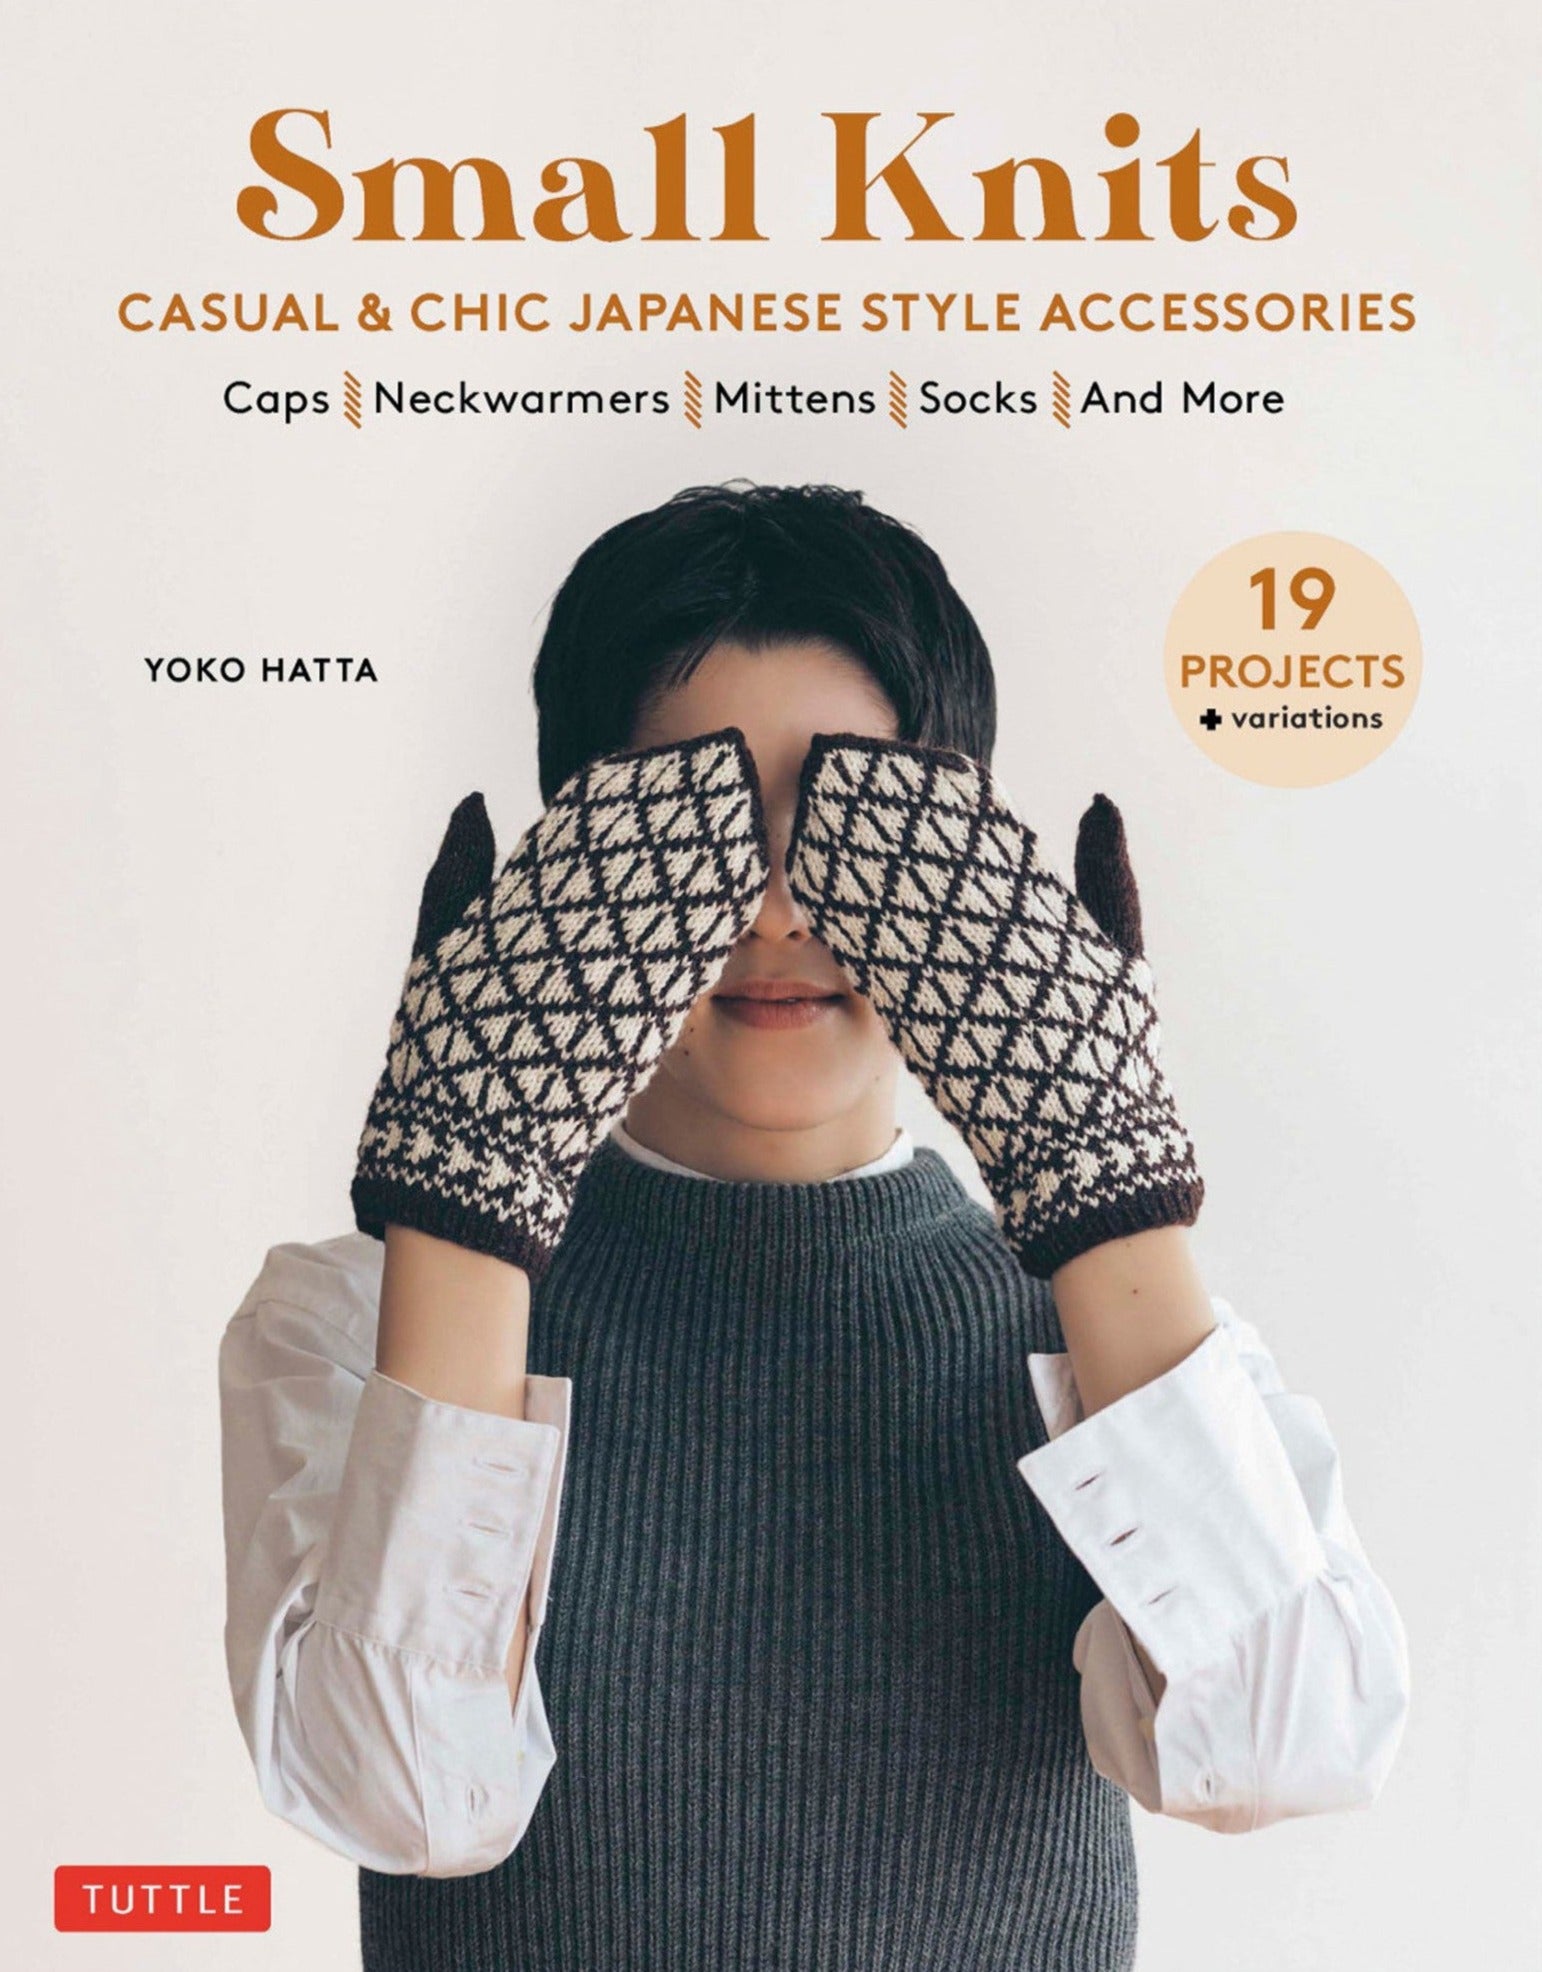 Small knits - casual and chic Japanese style accessories